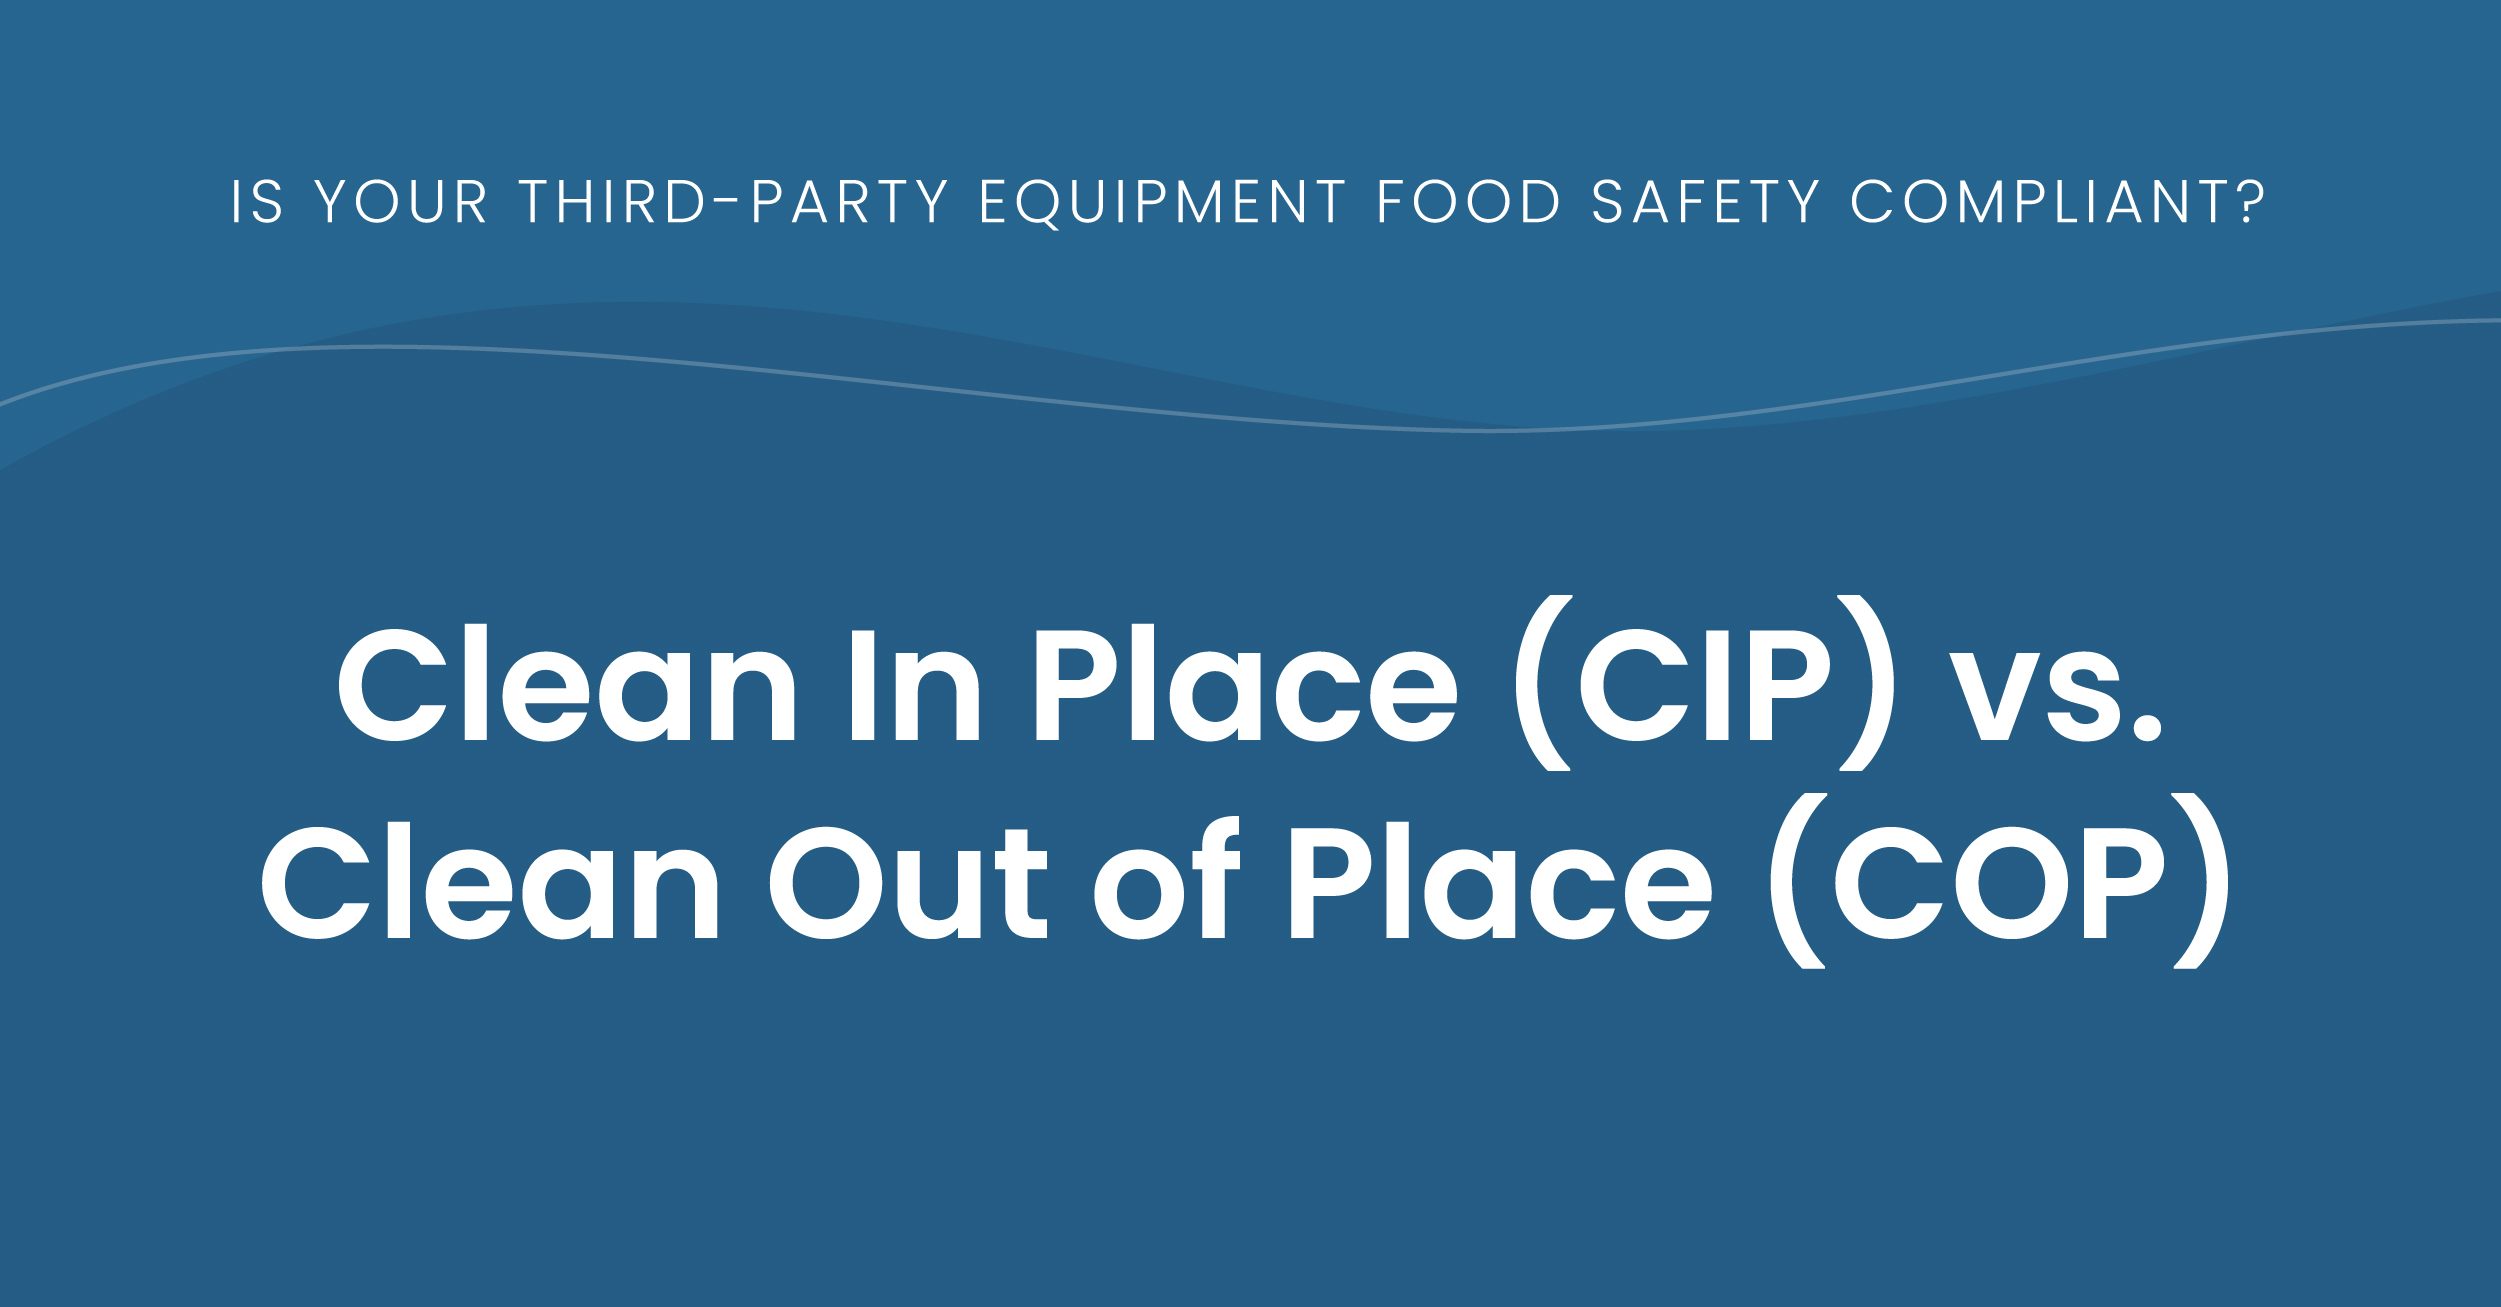 Text over a blue wavy background that says, "Is Your Third-Party Equipment Food Safety Compliant? Clean In Place (CIP) vs. Clean Out of Place (COP)"